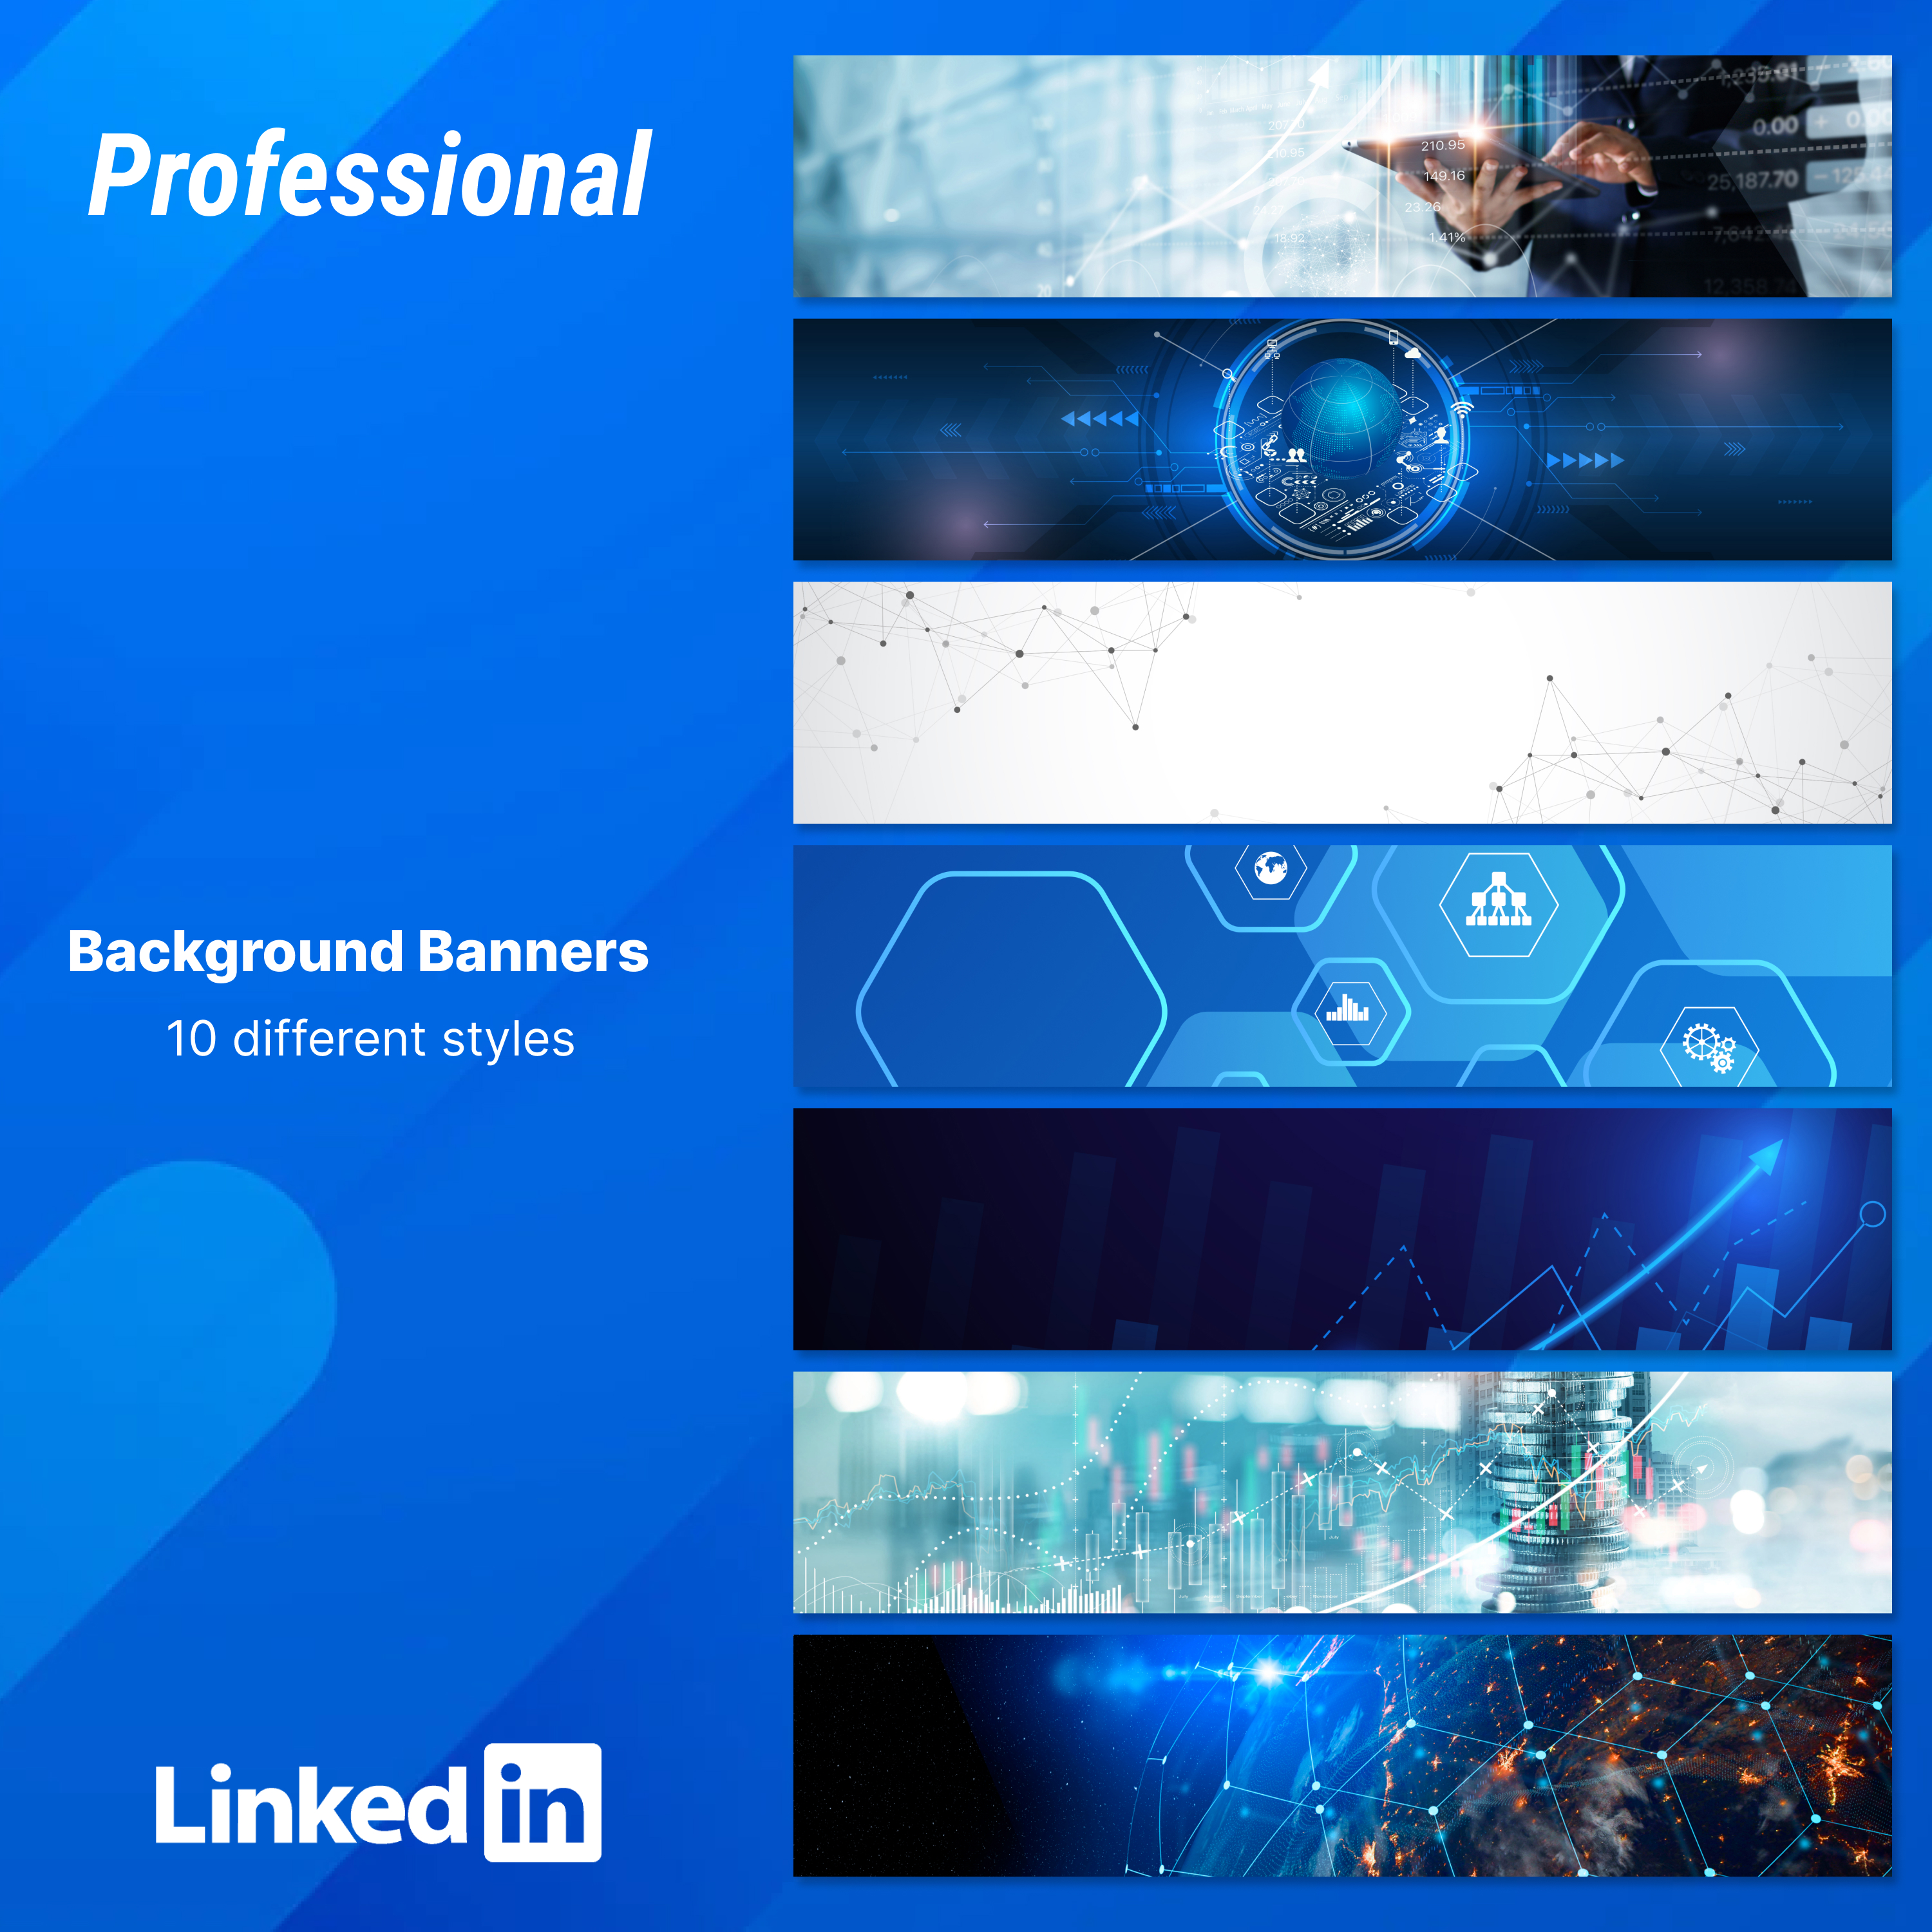 Prints of professional linkedin background banners.